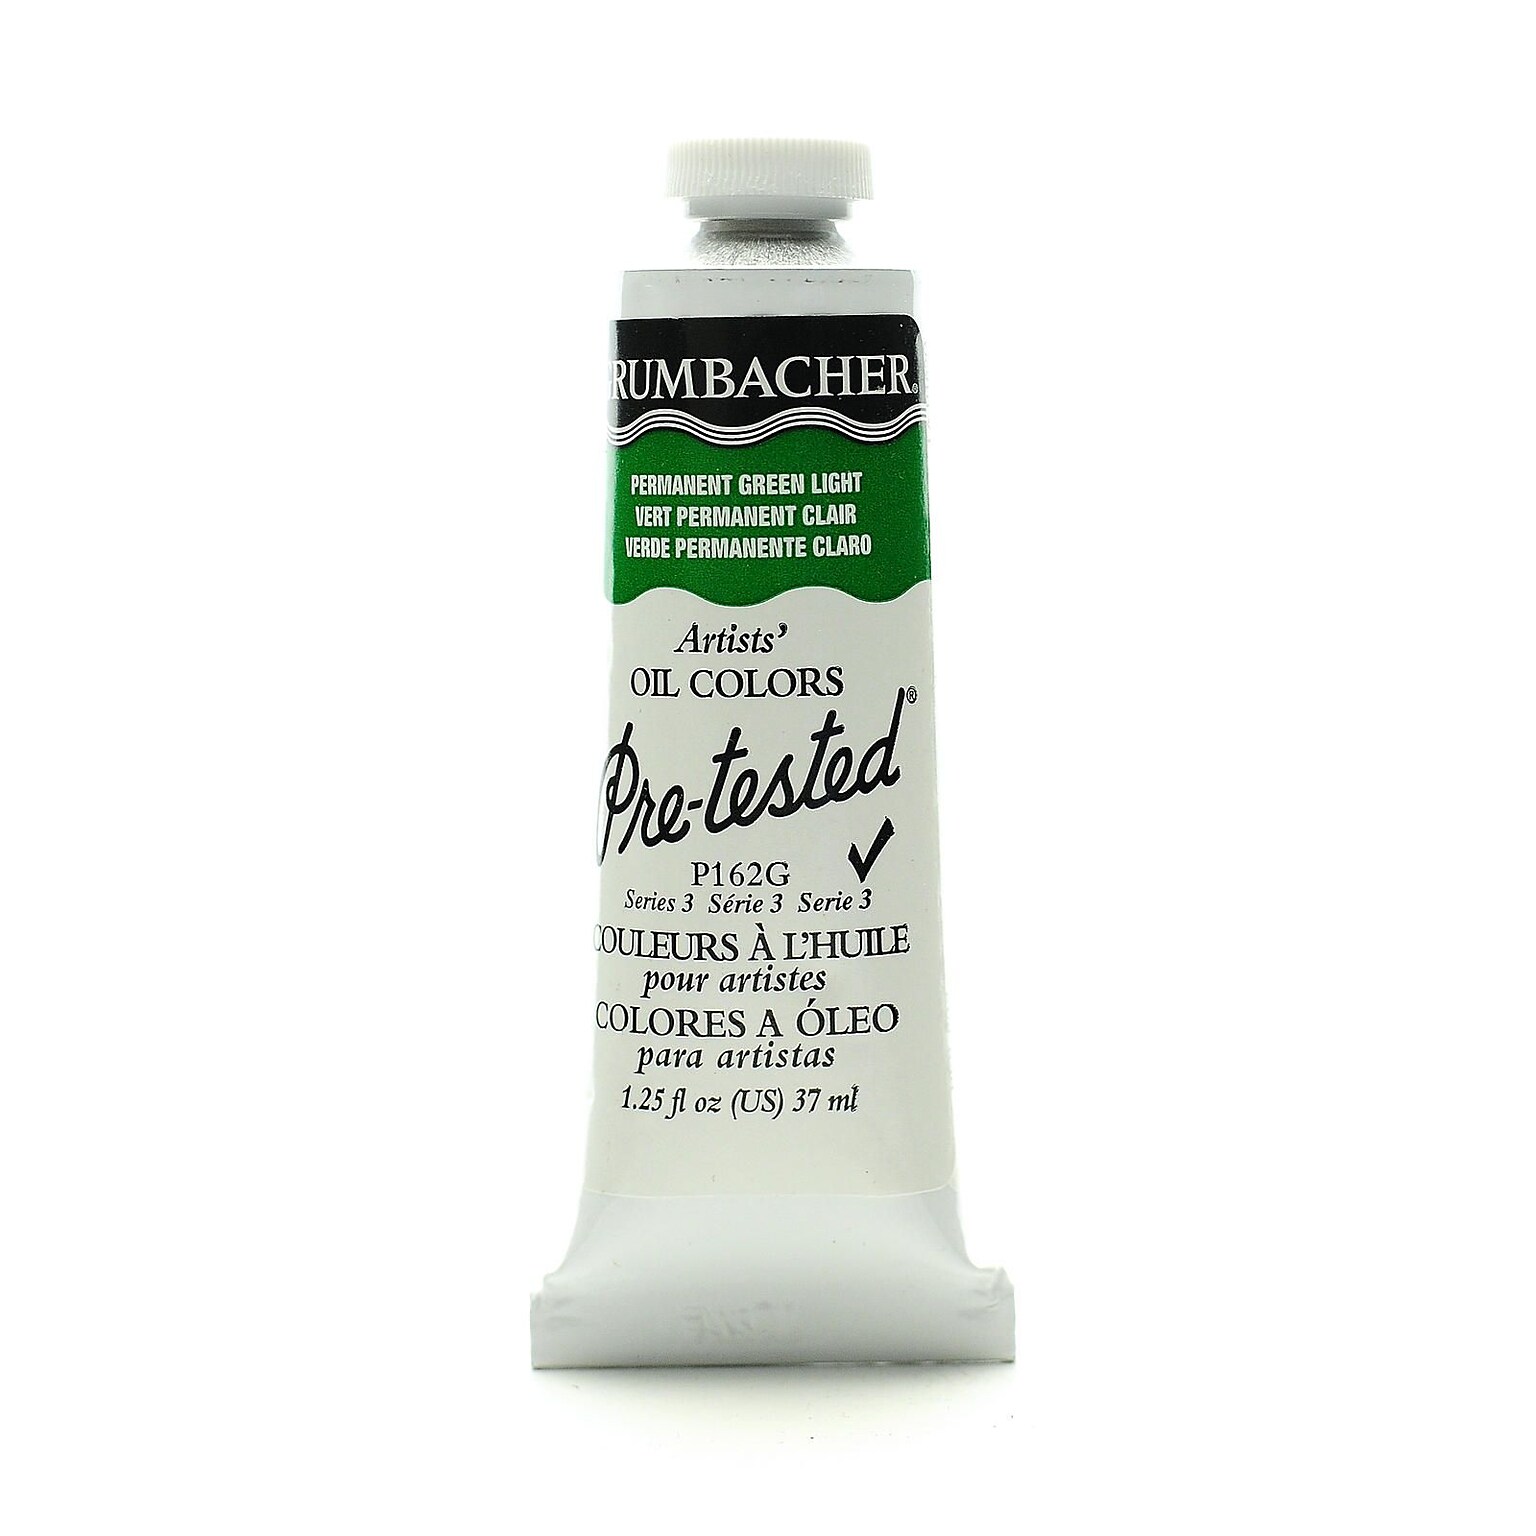 Grumbacher Pre-Tested Artists Oil Colors Permanent Green Light P162 1.25 Oz.